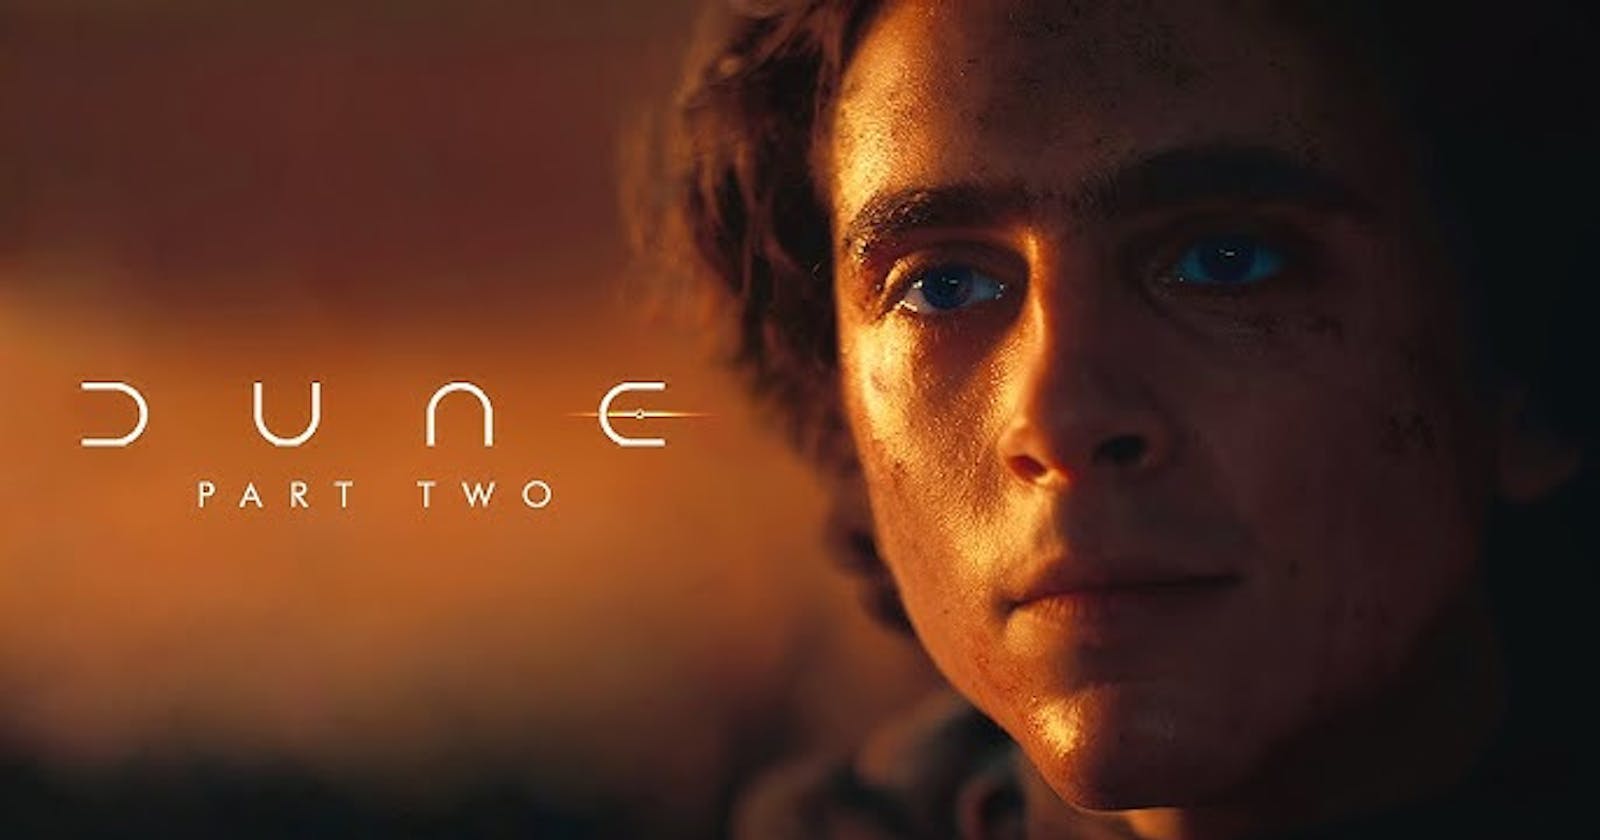 WHEN IS Dune: Part Two COMING OUT? CAST, ABOUT MOVIE!!